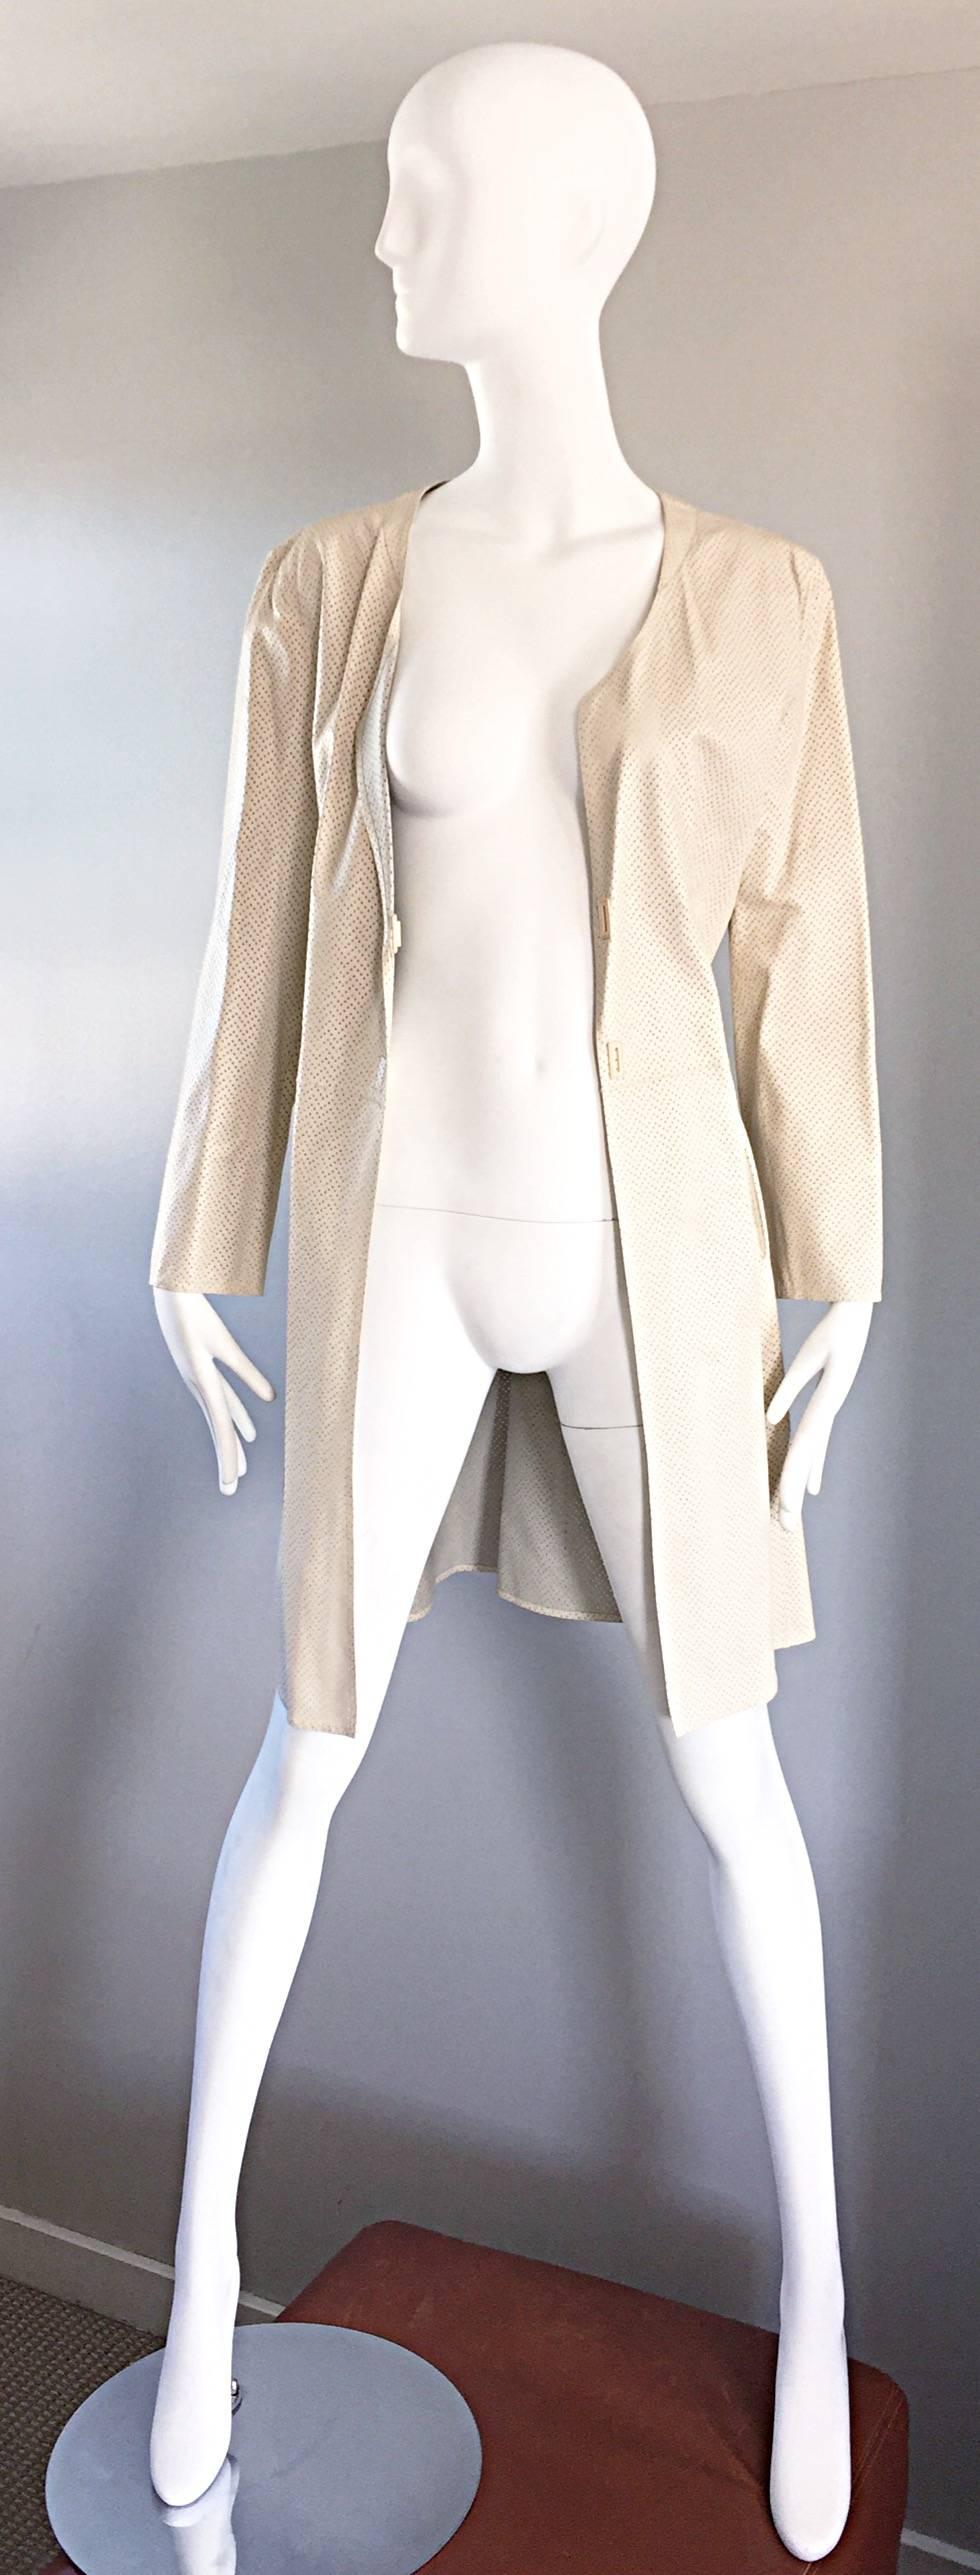 Vintage Giorgio Armani 1990s Ivory Beige Perforated Leather 90s Trench Jacket  In Excellent Condition For Sale In San Diego, CA